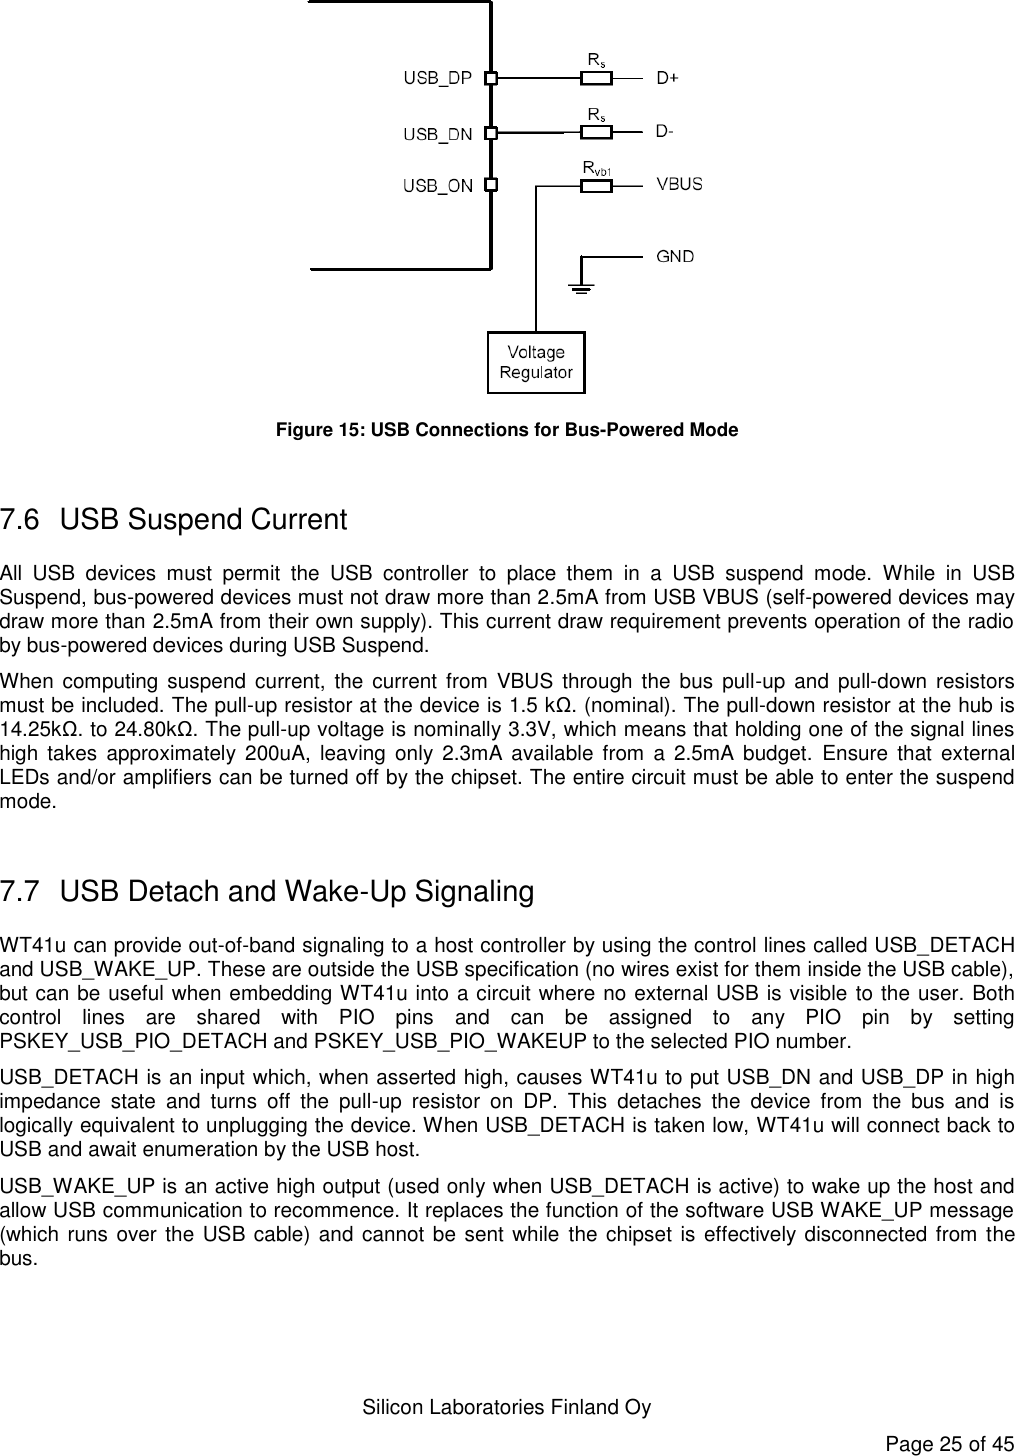   Silicon Laboratories Finland Oy Page 25 of 45  Figure 15: USB Connections for Bus-Powered Mode  7.6  USB Suspend Current All  USB  devices  must  permit  the  USB  controller  to  place  them  in  a  USB  suspend  mode.  While  in  USB Suspend, bus-powered devices must not draw more than 2.5mA from USB VBUS (self-powered devices may draw more than 2.5mA from their own supply). This current draw requirement prevents operation of the radio by bus-powered devices during USB Suspend. When computing suspend  current, the current from VBUS through  the bus  pull-up and  pull-down resistors must be included. The pull-up resistor at the device is 1.5 kΩ. (nominal). The pull-down resistor at the hub is 14.25kΩ. to 24.80kΩ. The pull-up voltage is nominally 3.3V, which means that holding one of the signal lines high  takes  approximately  200uA,  leaving  only  2.3mA  available  from  a  2.5mA budget.  Ensure  that  external LEDs and/or amplifiers can be turned off by the chipset. The entire circuit must be able to enter the suspend mode.  7.7  USB Detach and Wake-Up Signaling WT41u can provide out-of-band signaling to a host controller by using the control lines called USB_DETACH and USB_WAKE_UP. These are outside the USB specification (no wires exist for them inside the USB cable), but can be useful when embedding WT41u into a circuit where no external USB is visible to the user. Both control  lines  are  shared  with  PIO  pins  and  can  be  assigned  to  any  PIO  pin  by  setting PSKEY_USB_PIO_DETACH and PSKEY_USB_PIO_WAKEUP to the selected PIO number. USB_DETACH is an input which, when asserted high, causes WT41u to put USB_DN and USB_DP in high impedance  state  and  turns  off  the  pull-up  resistor  on  DP.  This  detaches  the  device  from  the  bus  and  is logically equivalent to unplugging the device. When USB_DETACH is taken low, WT41u will connect back to USB and await enumeration by the USB host. USB_WAKE_UP is an active high output (used only when USB_DETACH is active) to wake up the host and allow USB communication to recommence. It replaces the function of the software USB WAKE_UP message (which runs over the USB cable) and cannot be sent while the chipset is effectively disconnected from the bus. 